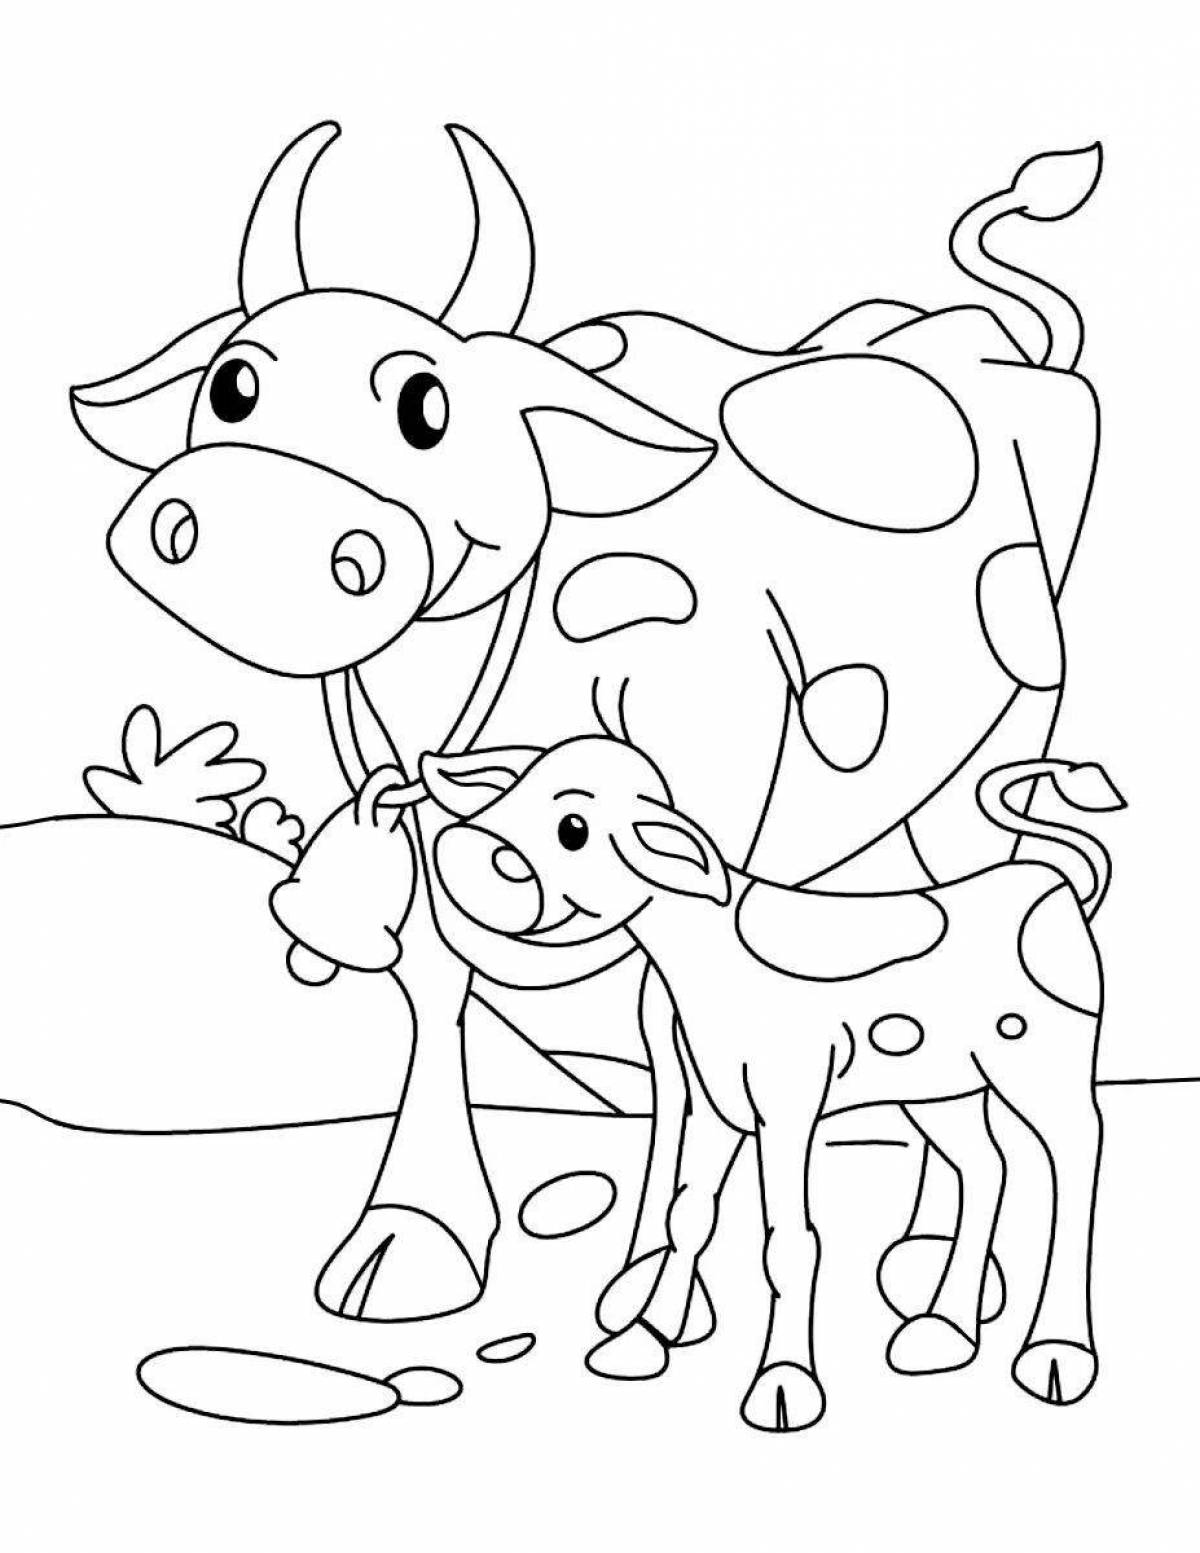 Coloring page festive cow and calf